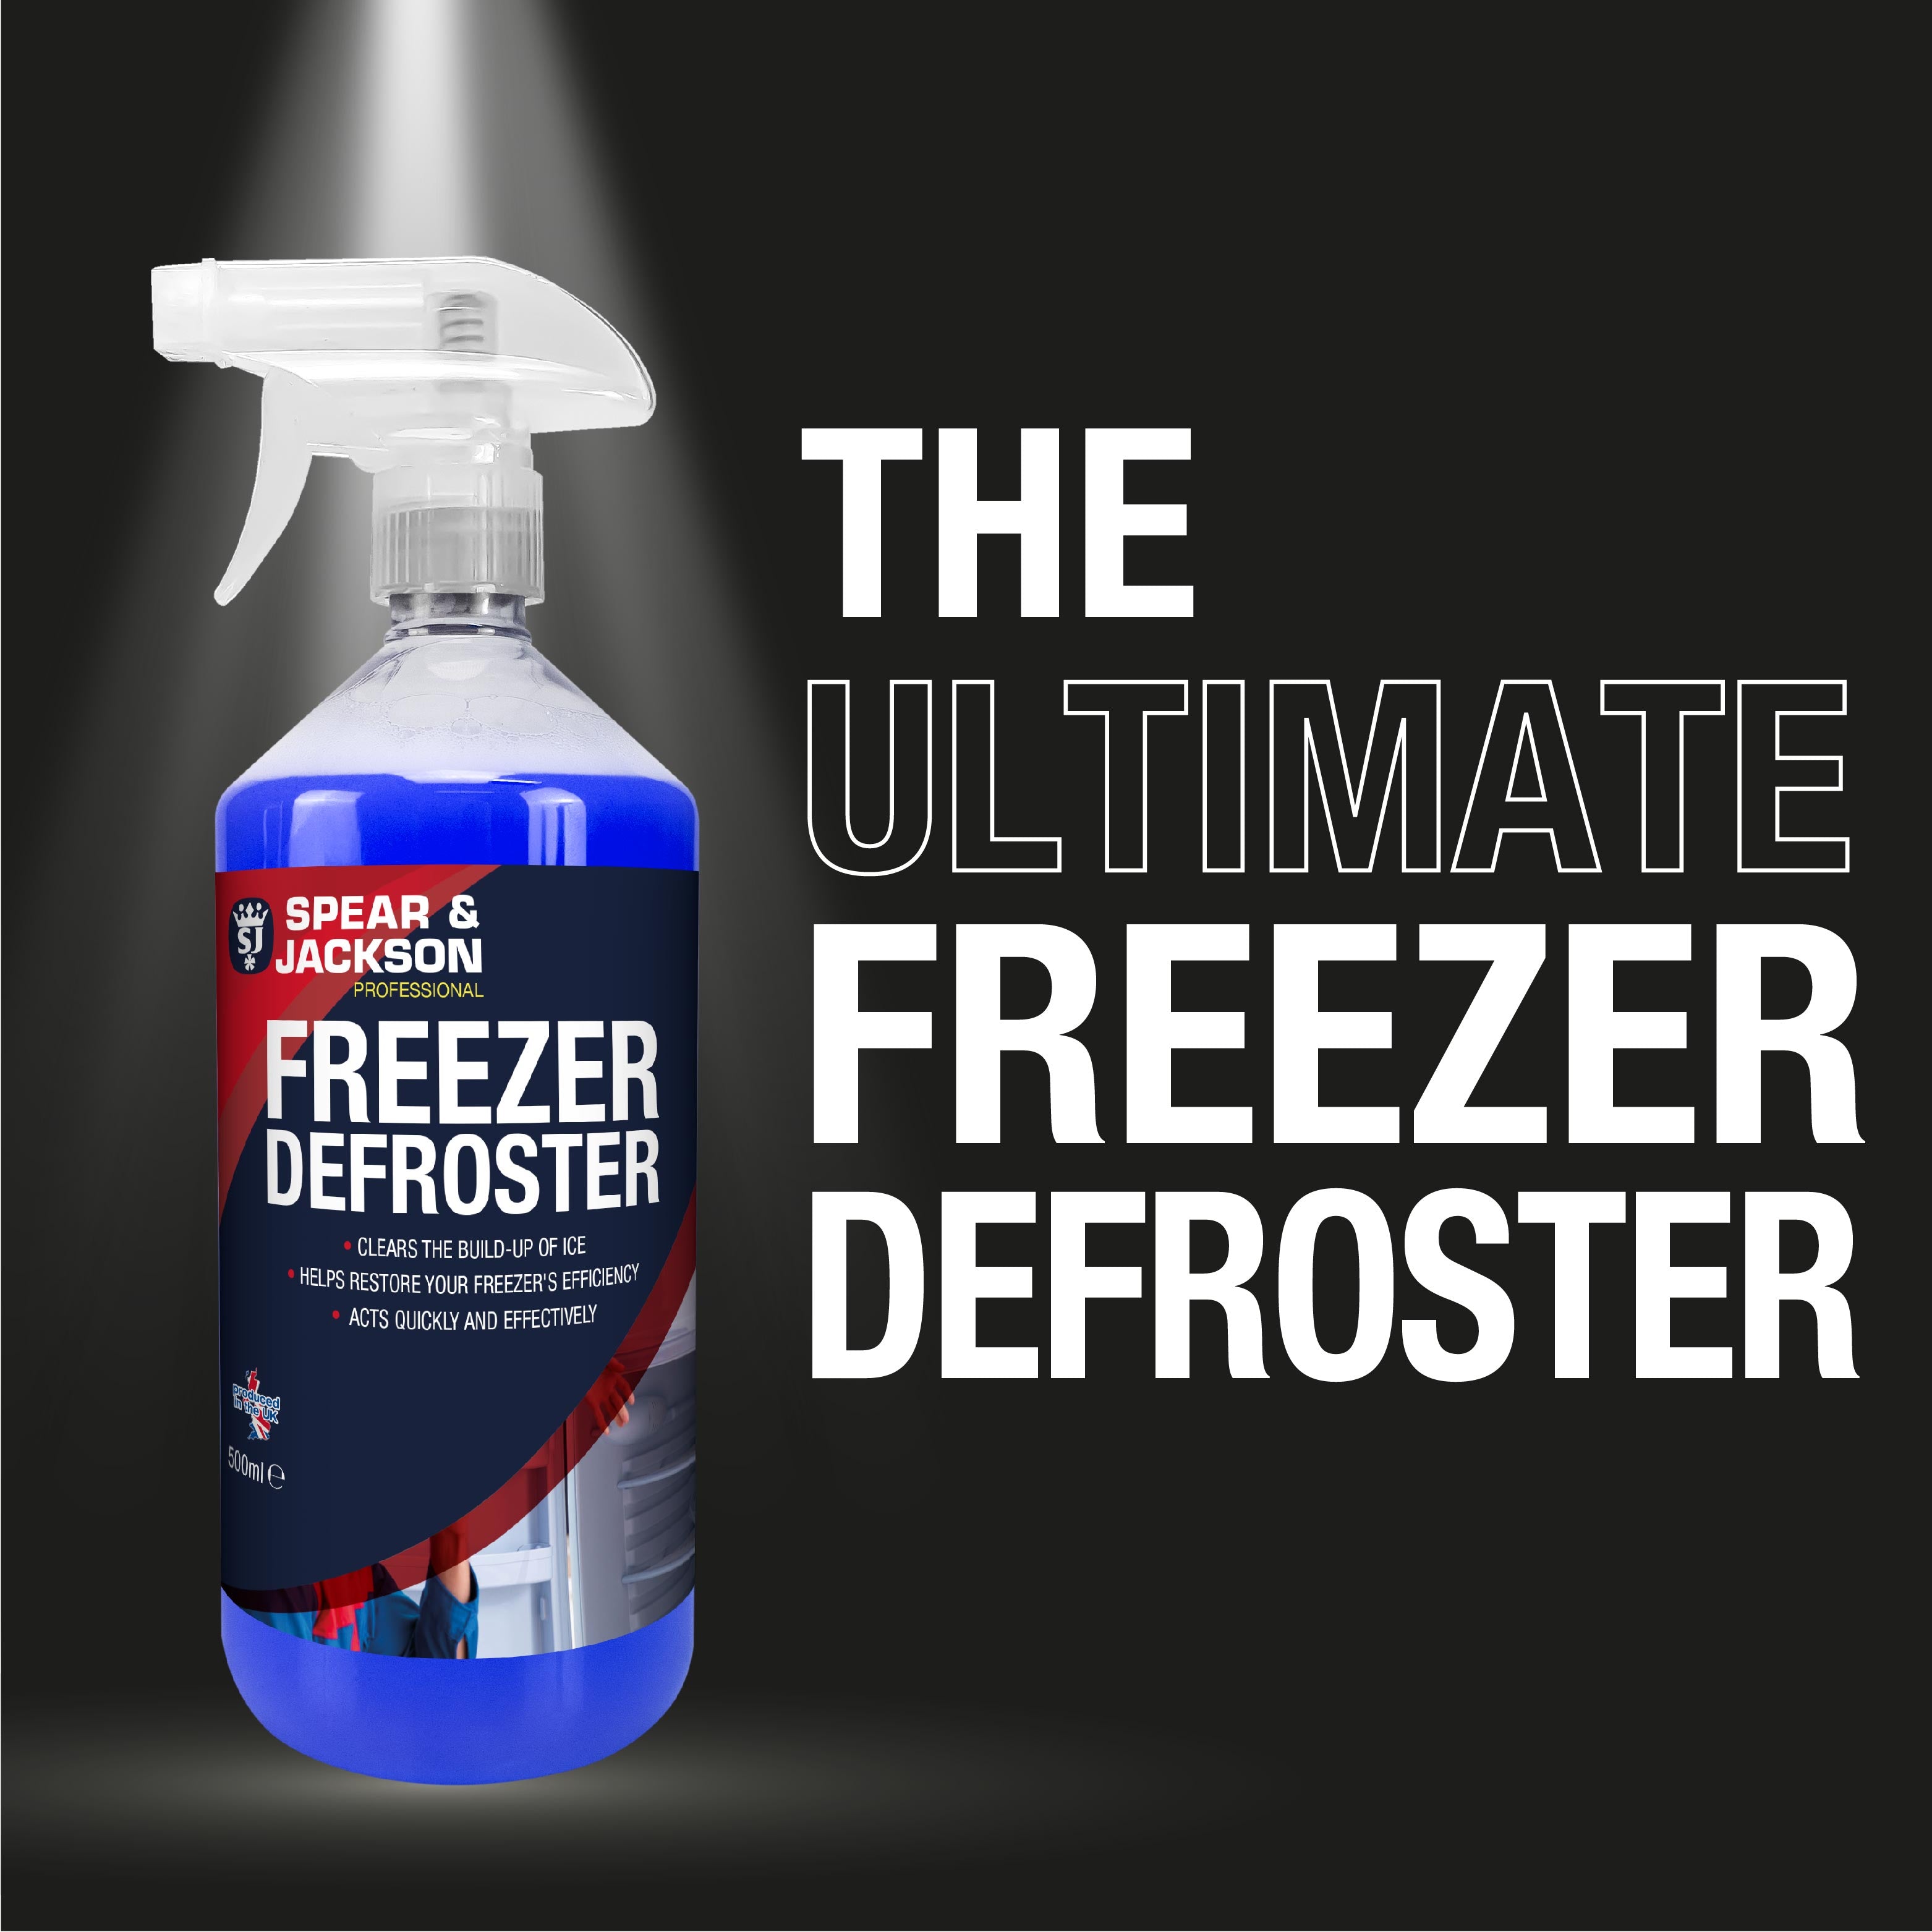 Spear and Jackson Freezer Defroster 2 x 500ml